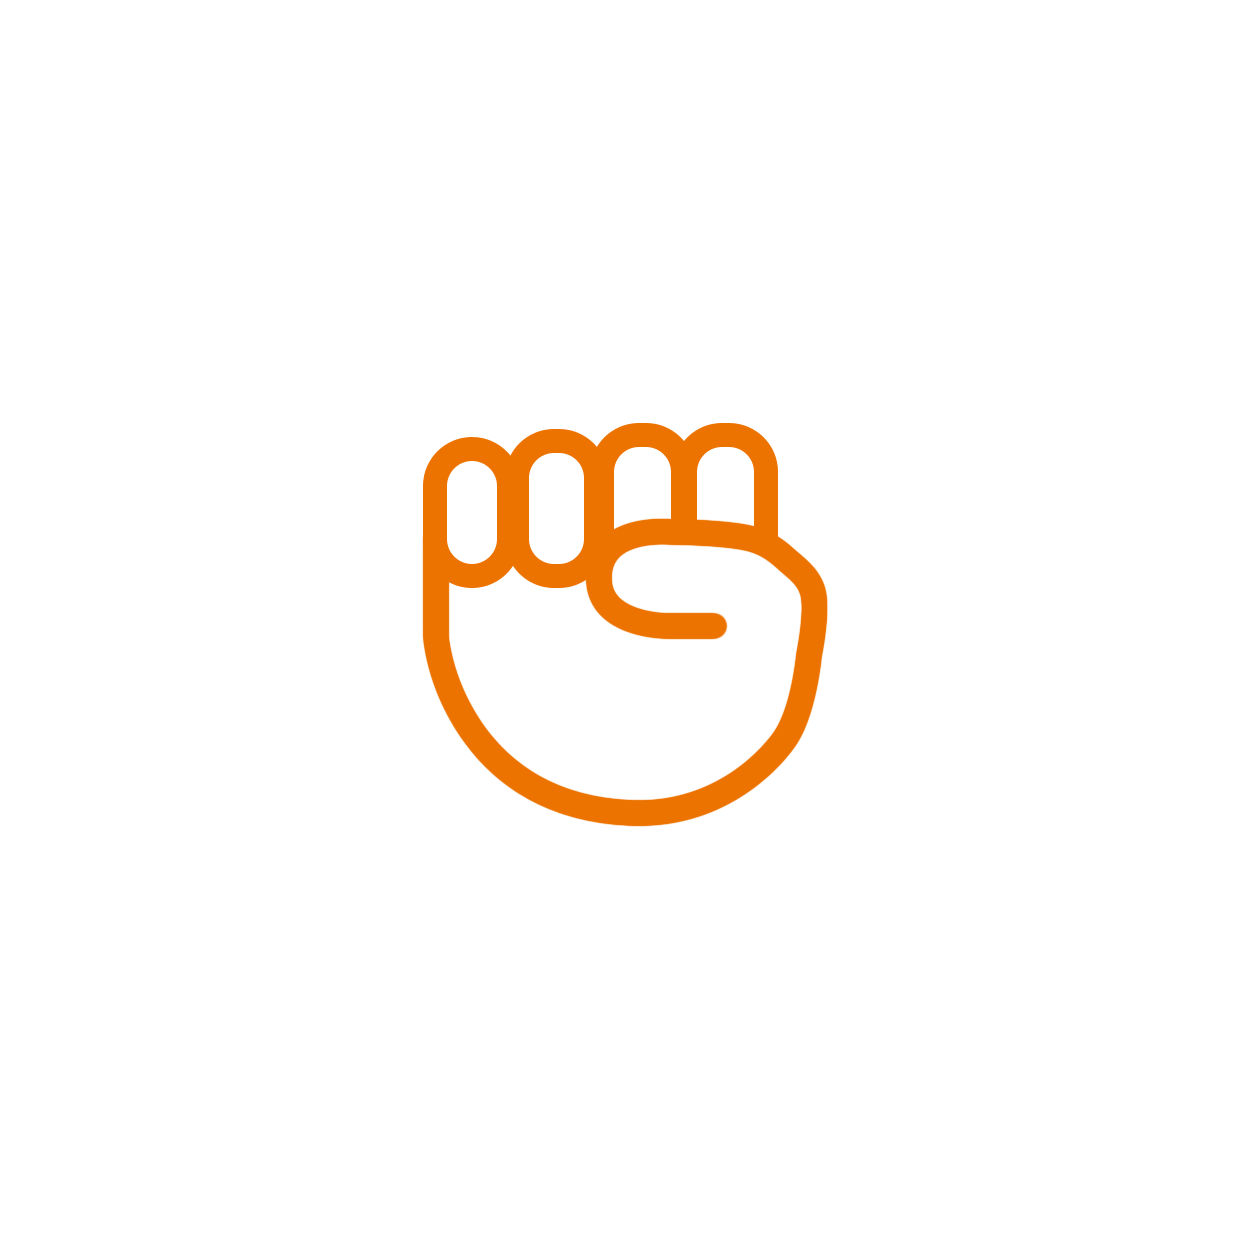 Icon showing a clenched fist